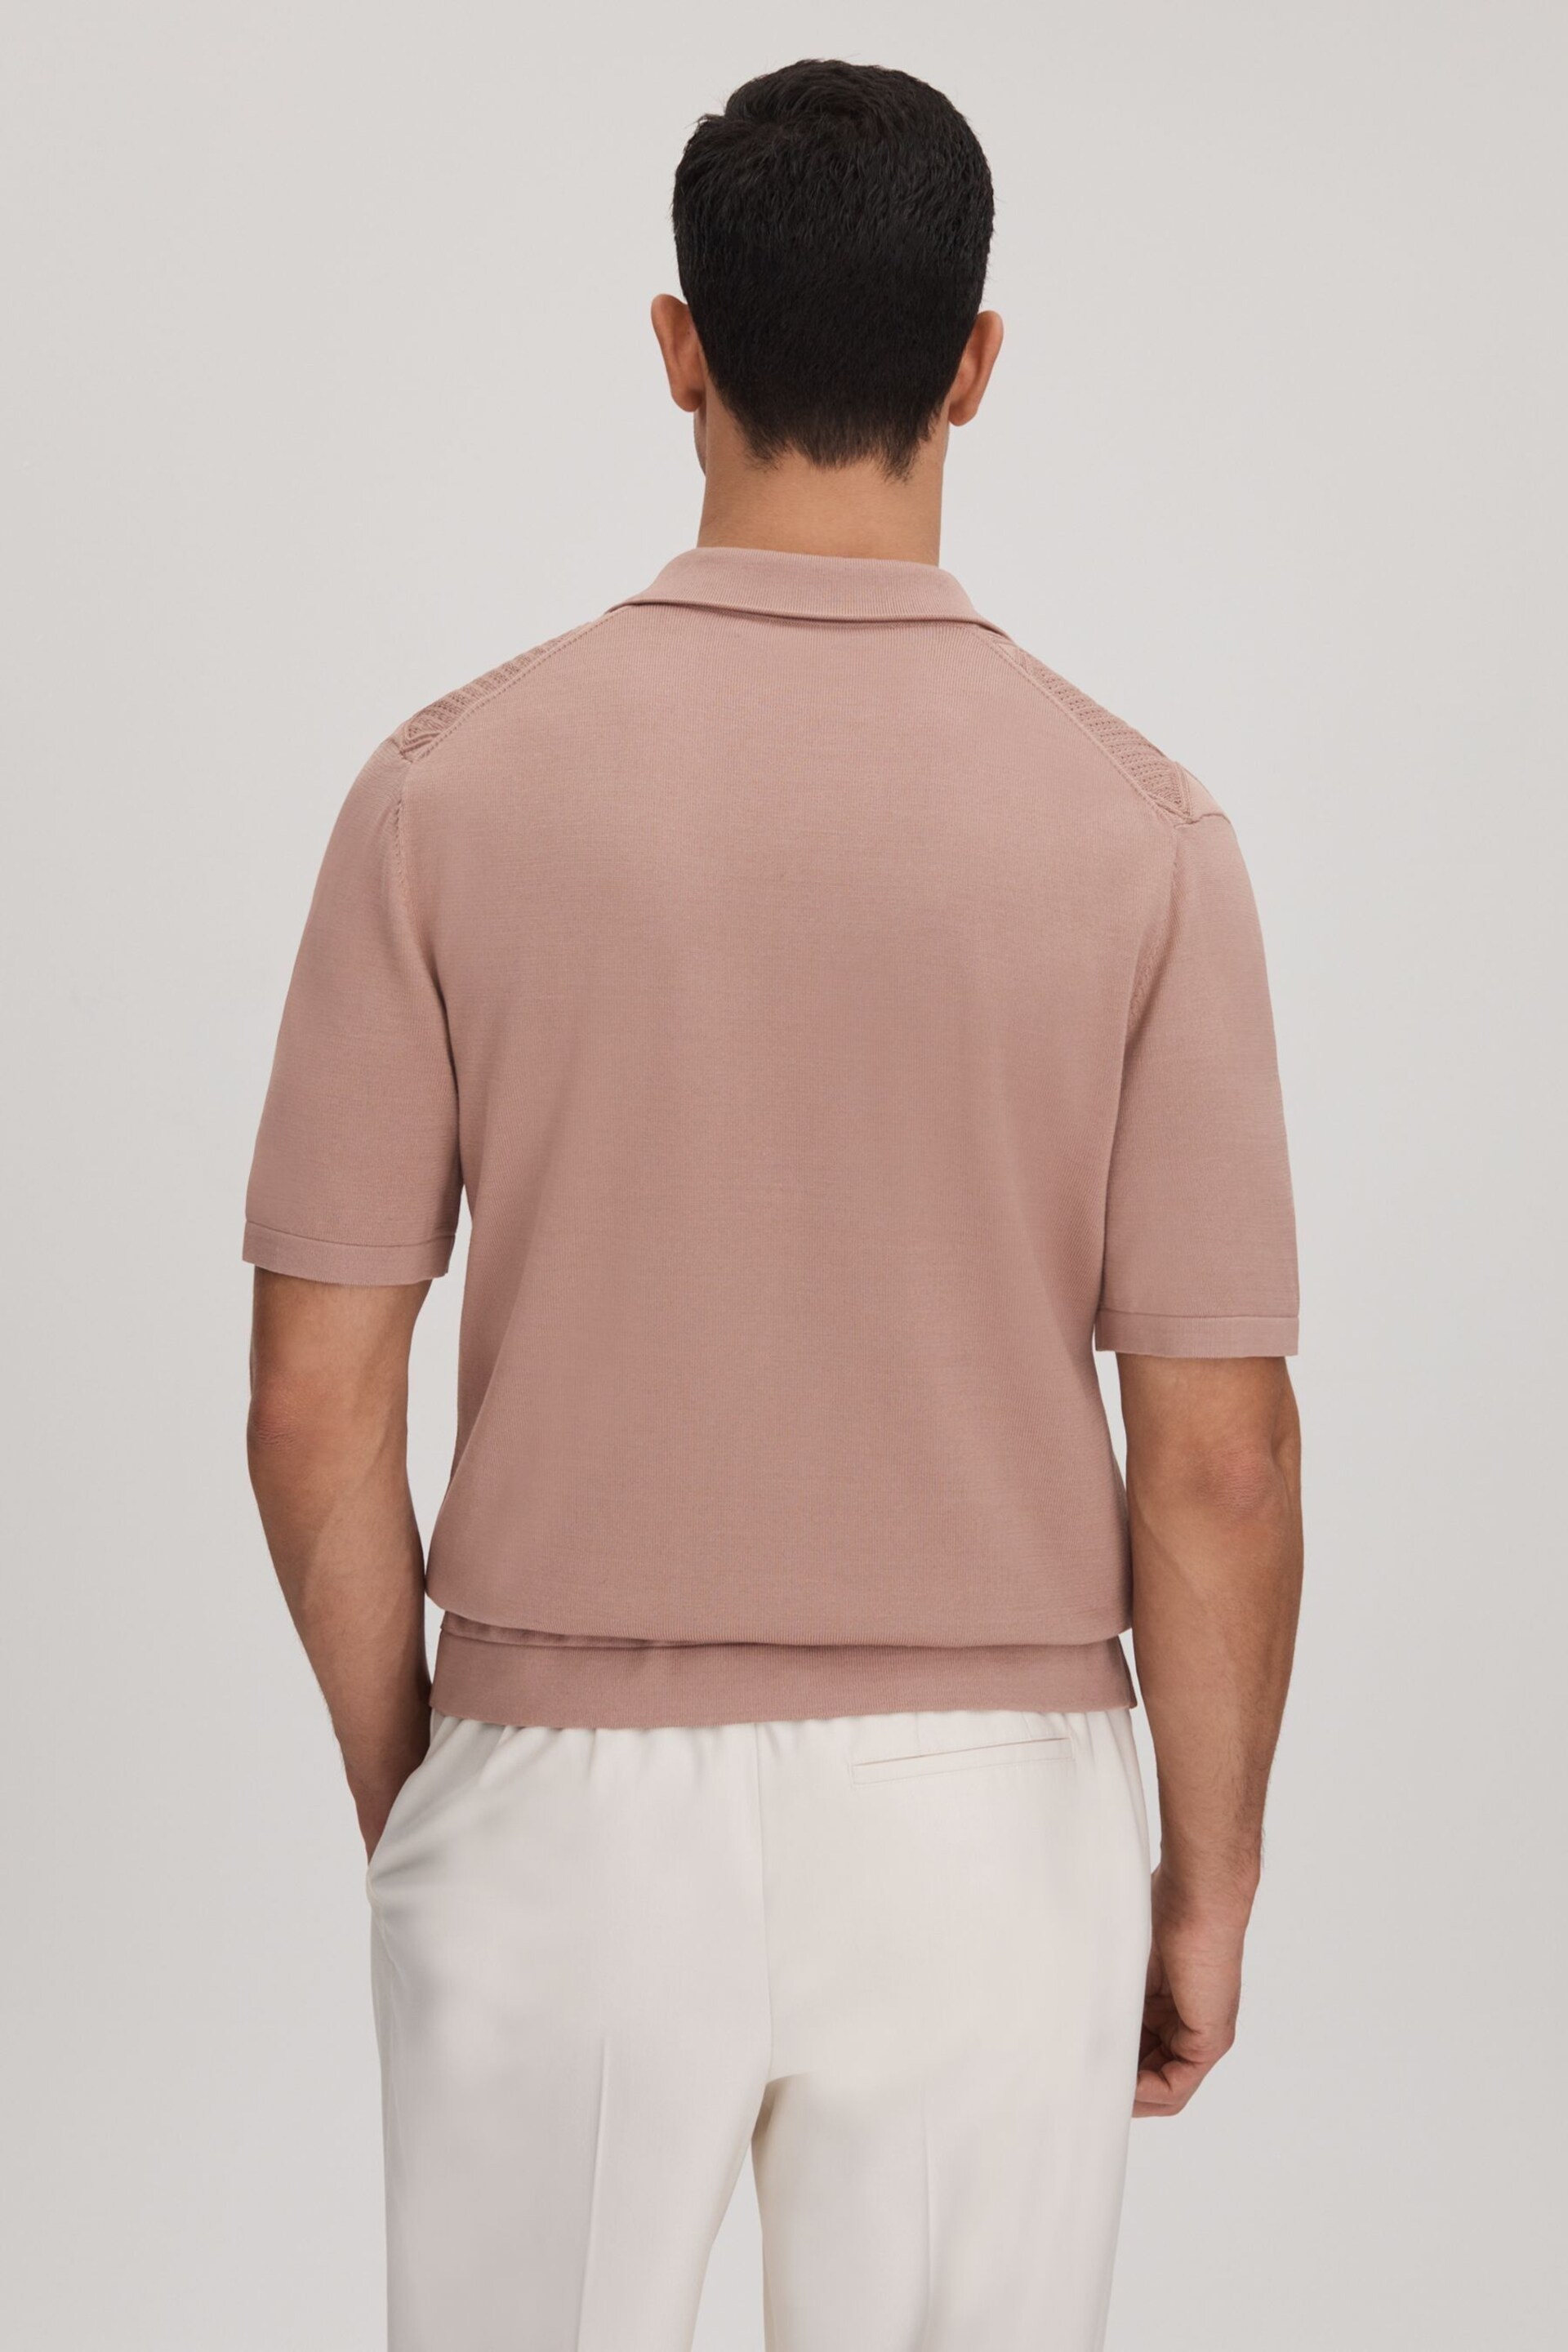 Reiss Rose Fortune Cable Knit Cuban Collar Shirt - Image 5 of 6